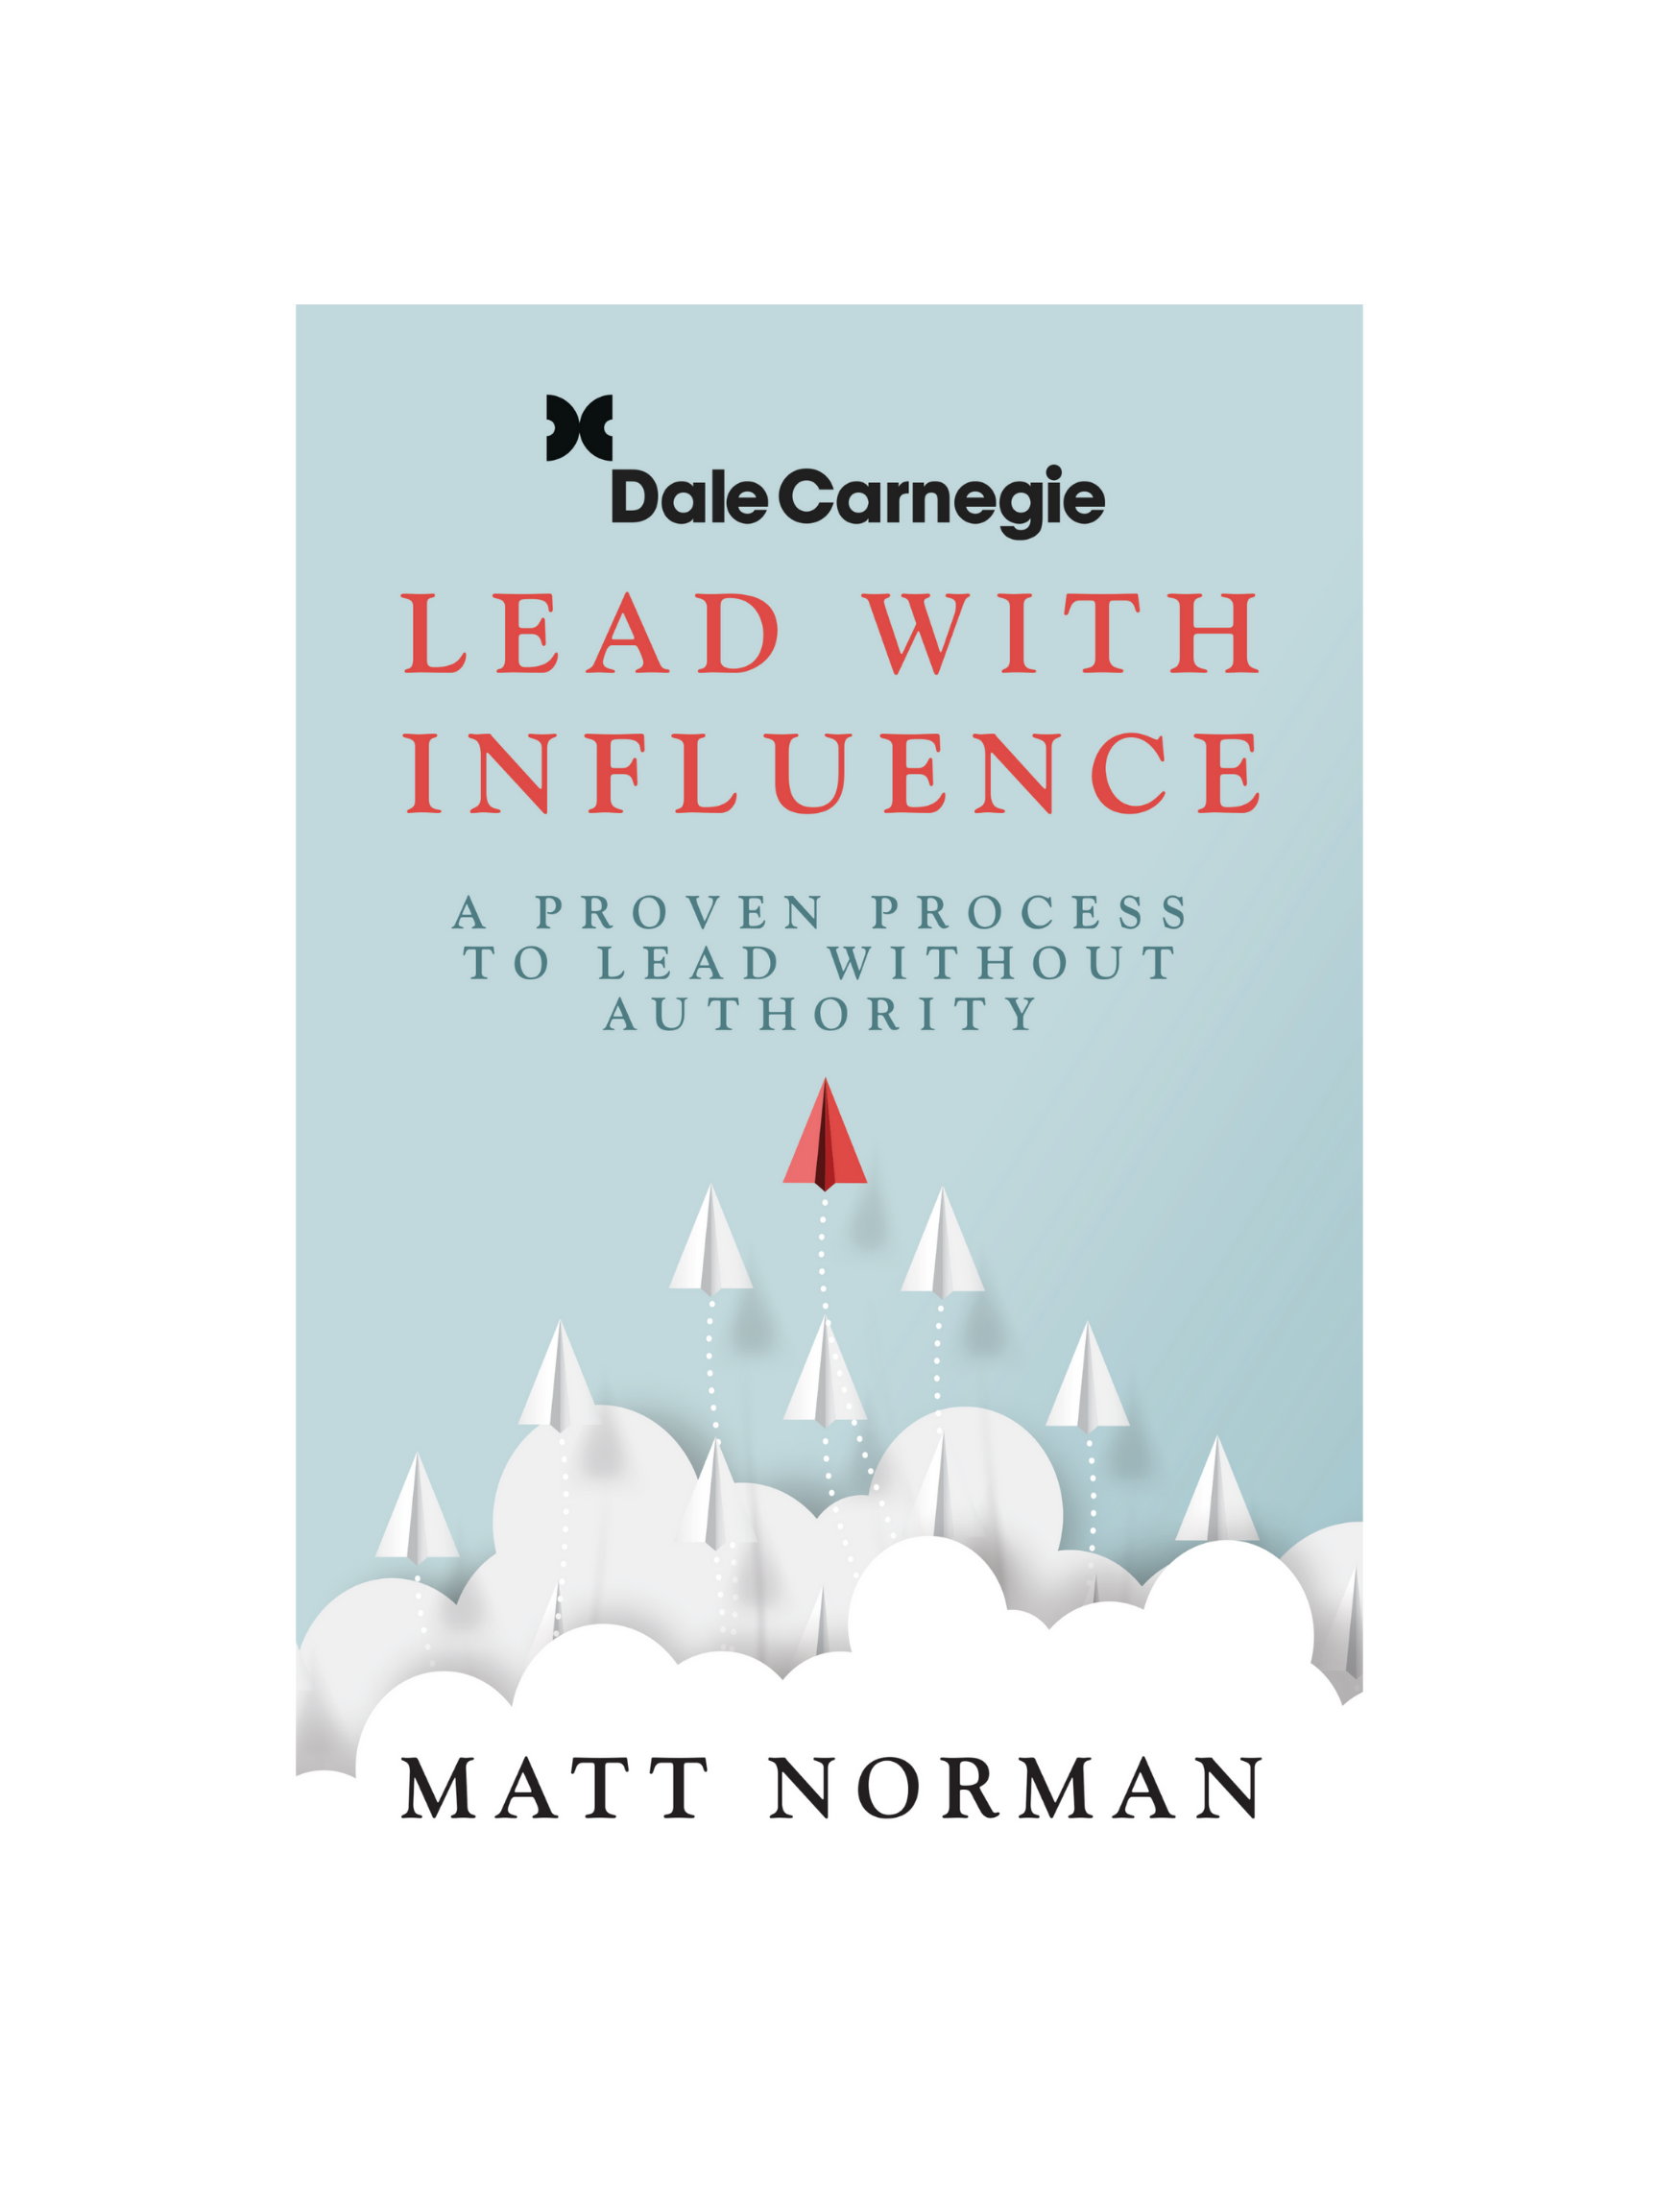 Lead with Influence book by Matt Norman, Dale Carnegie